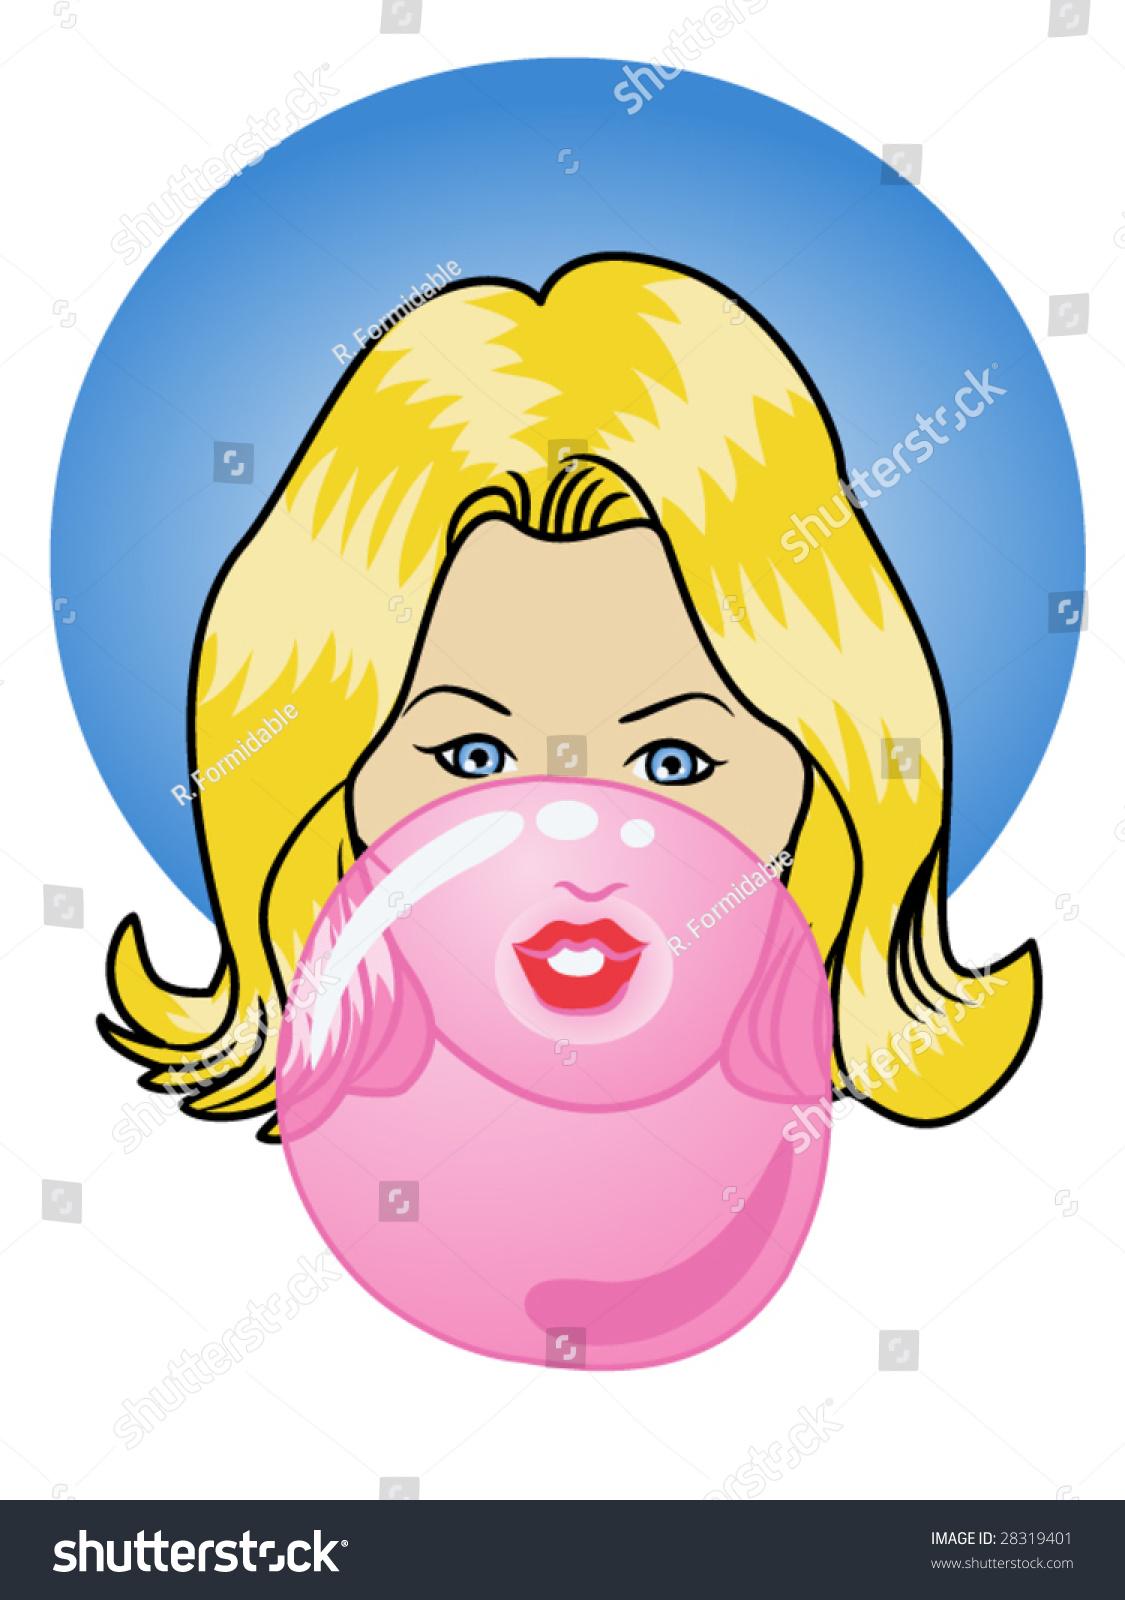 Vector Illustration Of A Girl Blowing A Bubble Gum Bubble 28319401